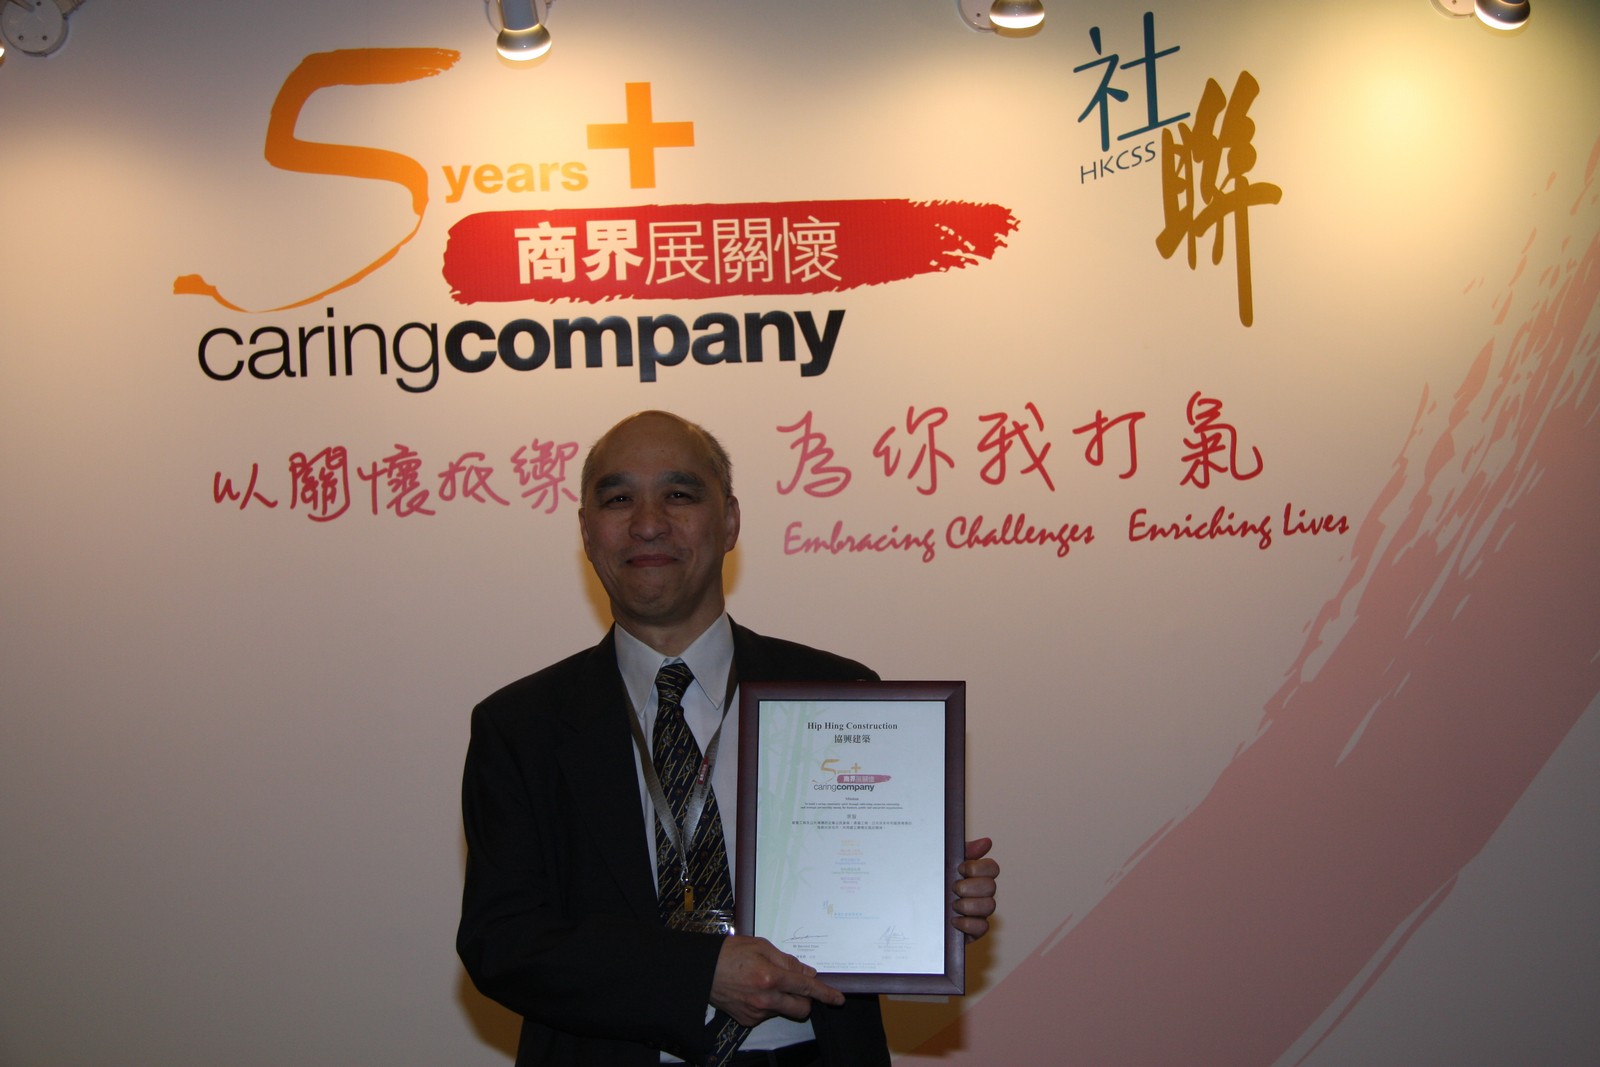 Hip Hing Construction has been awarded the Caring Company logo seven years in a row